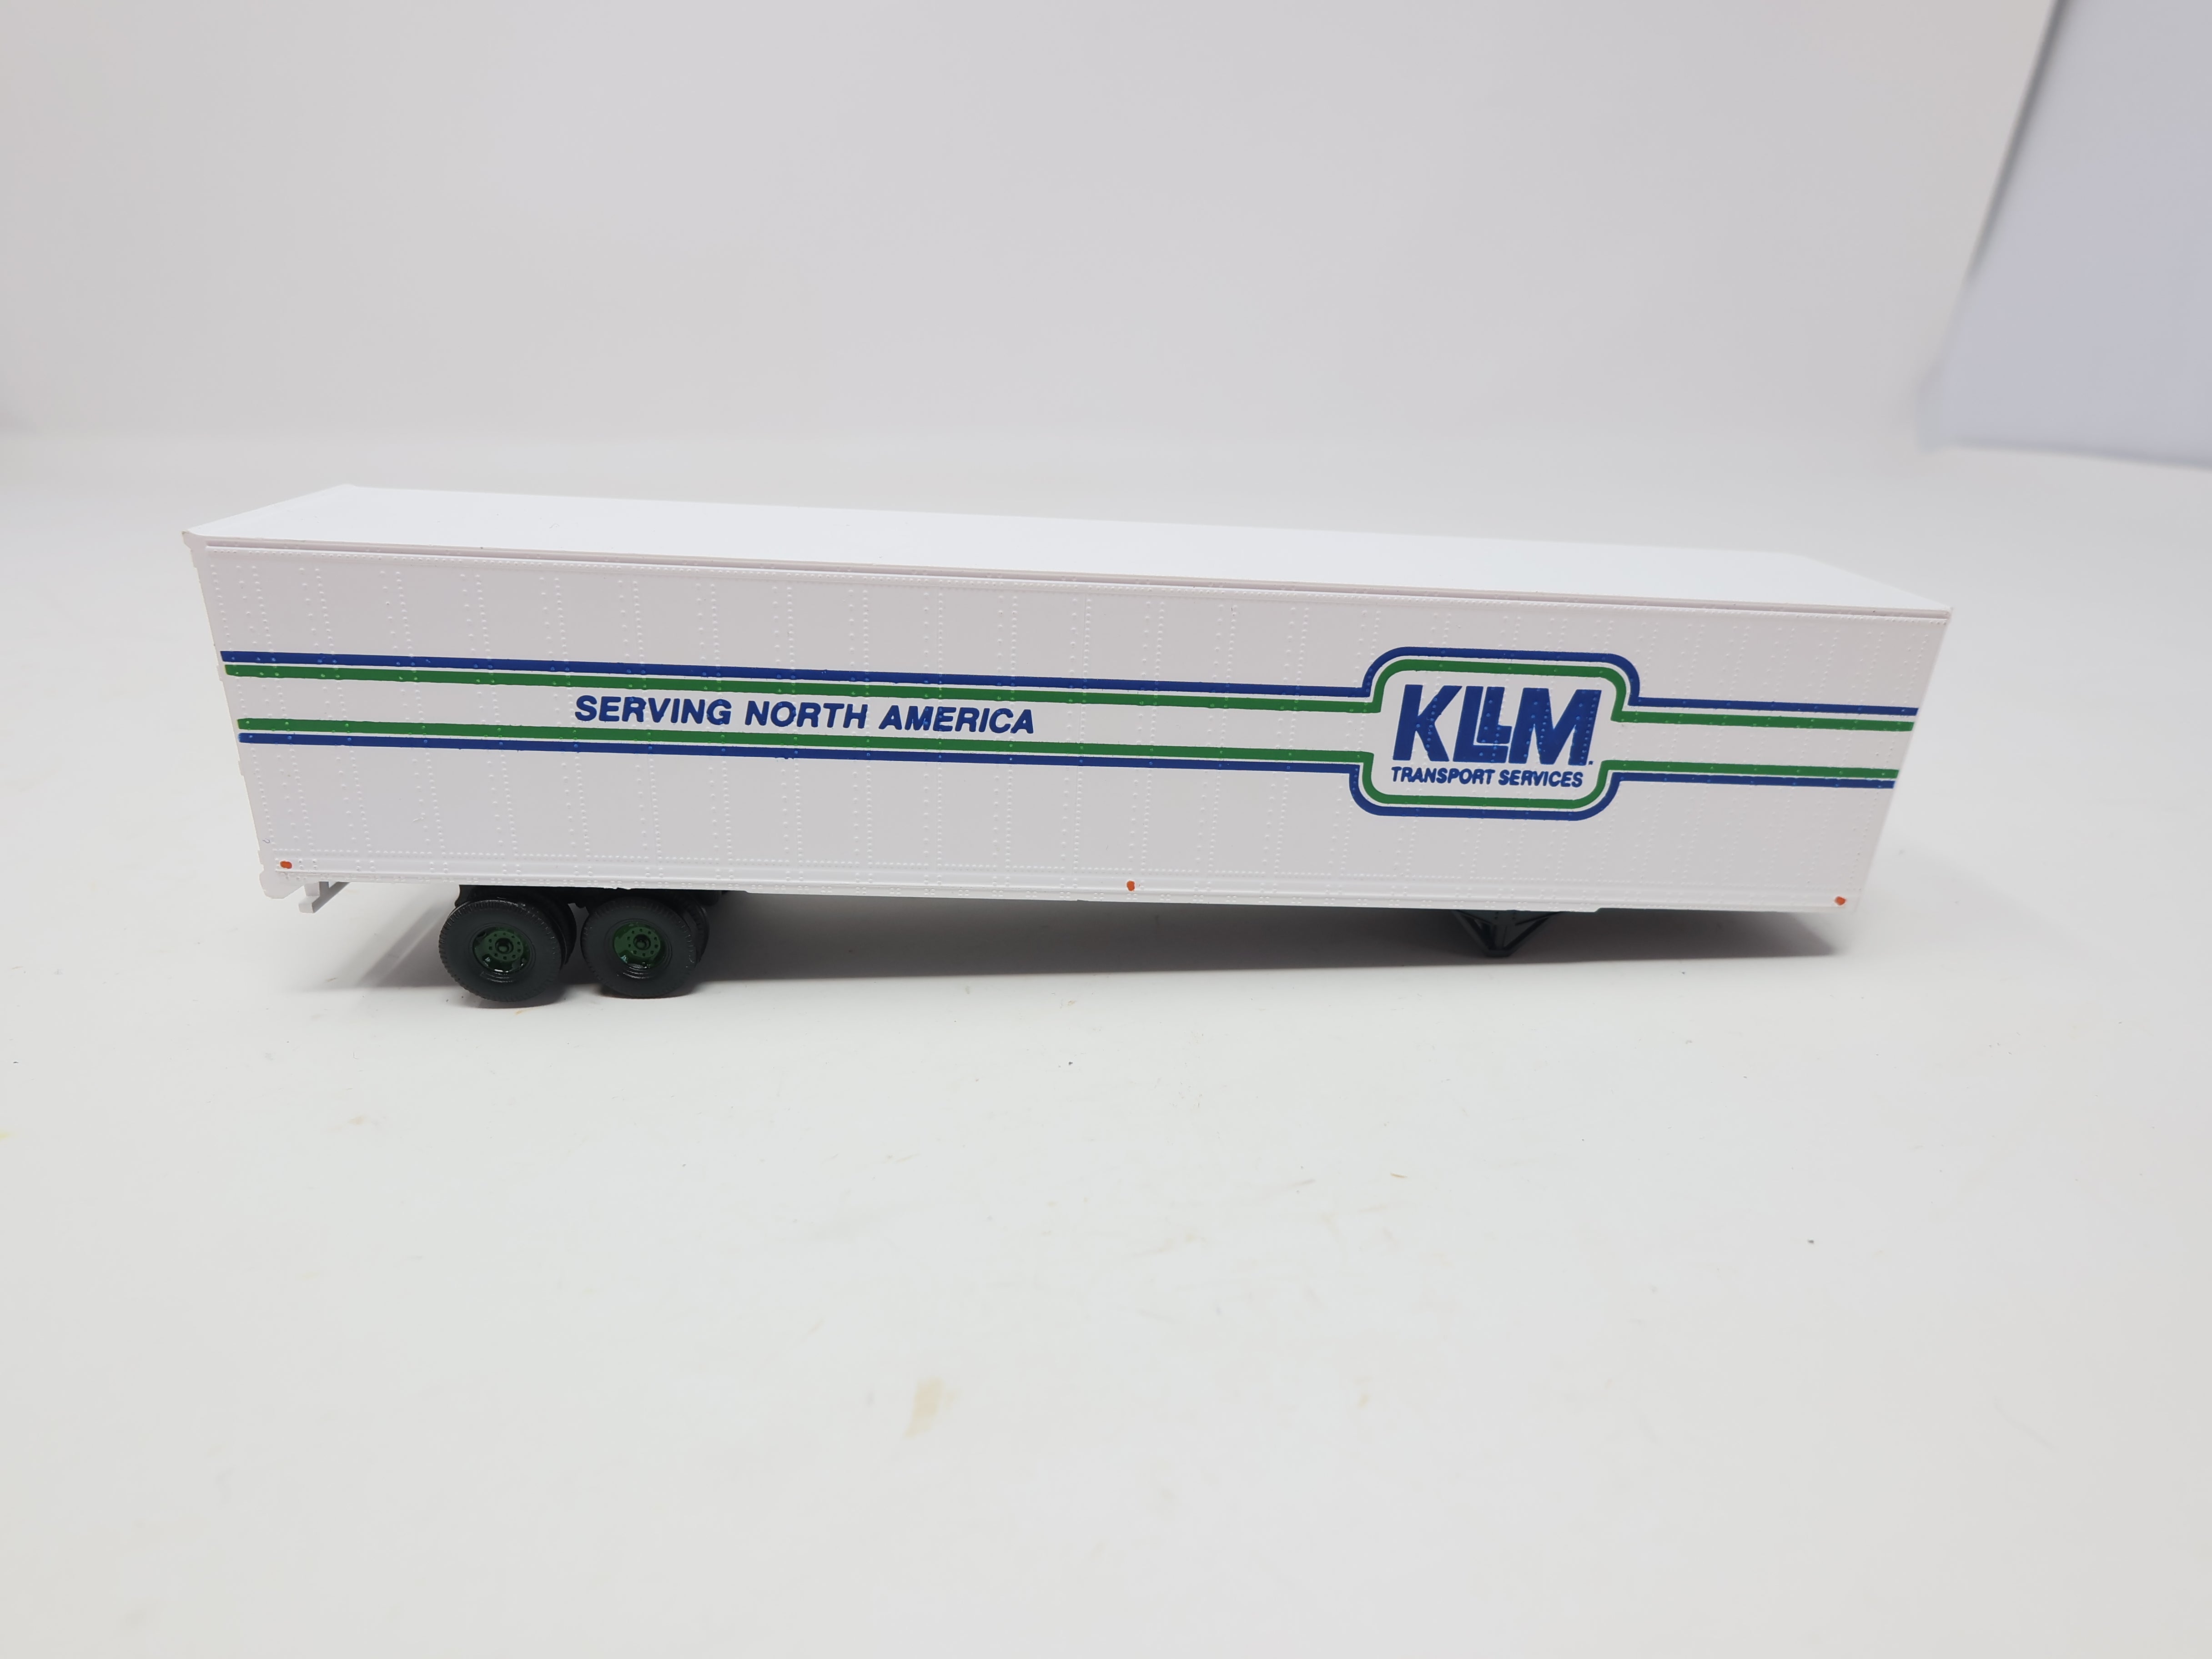 USED Walthers HO Scale, 48' Trailer, KLLM Transport Services KLMZ #84320